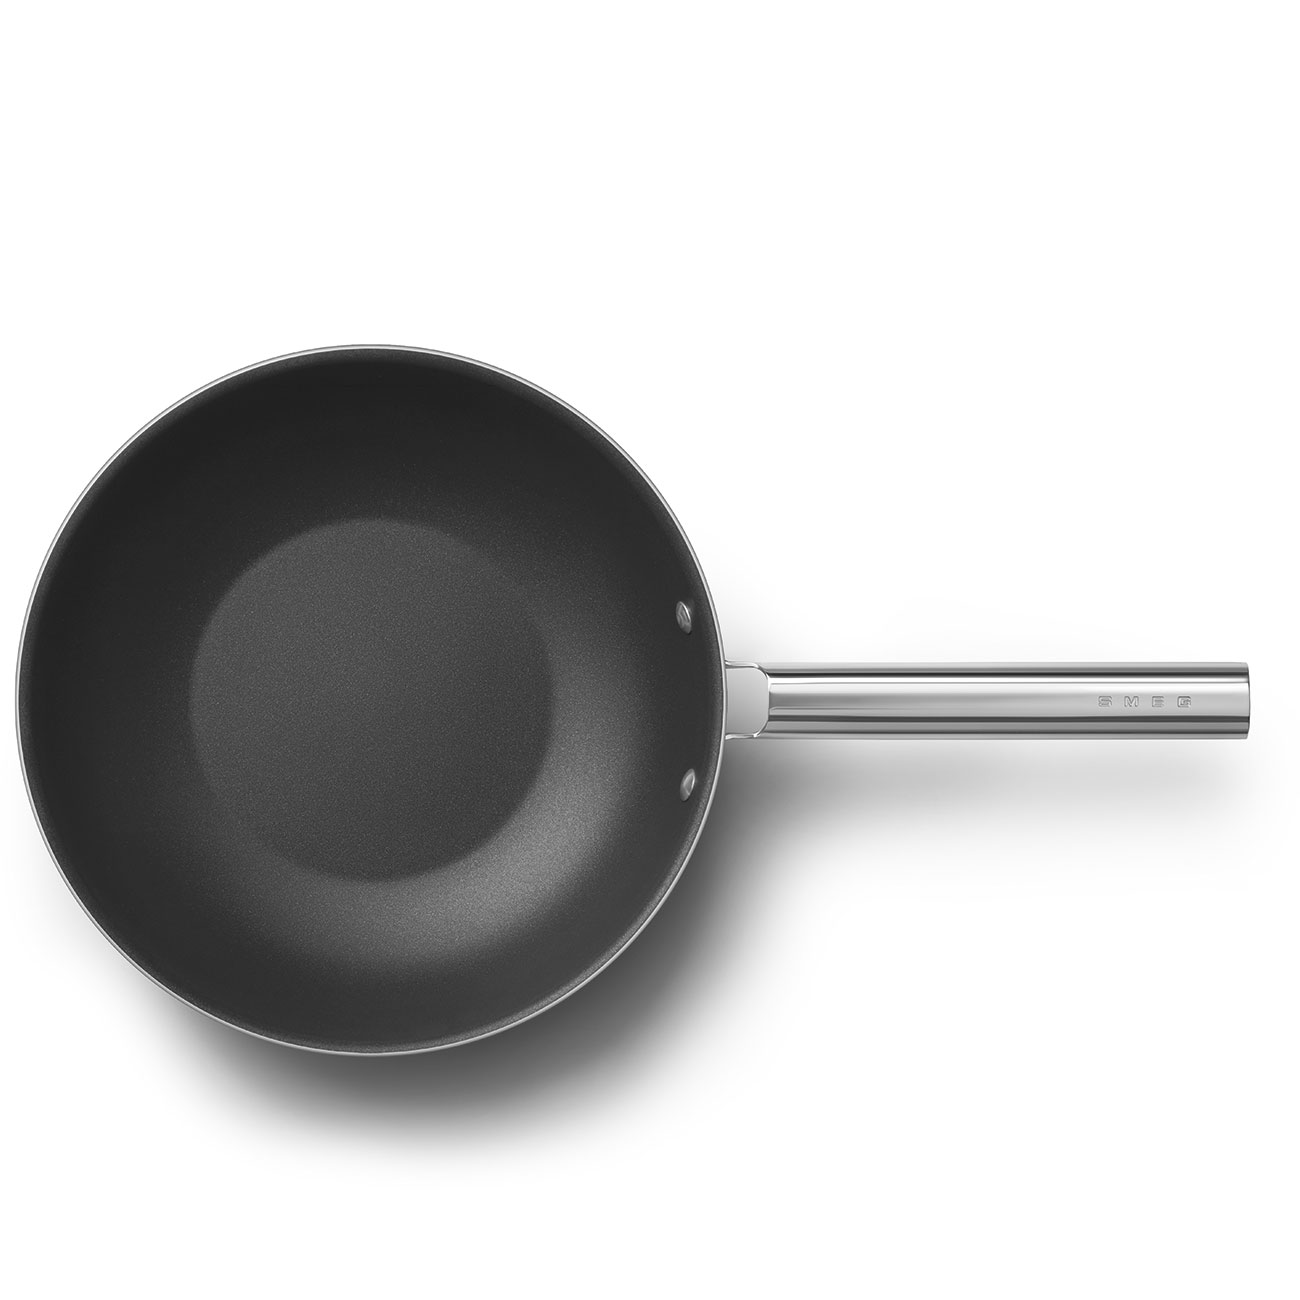 Smeg Cream Non-stick Wok with Stainless Steel Handle - CKFW3001CRM_4